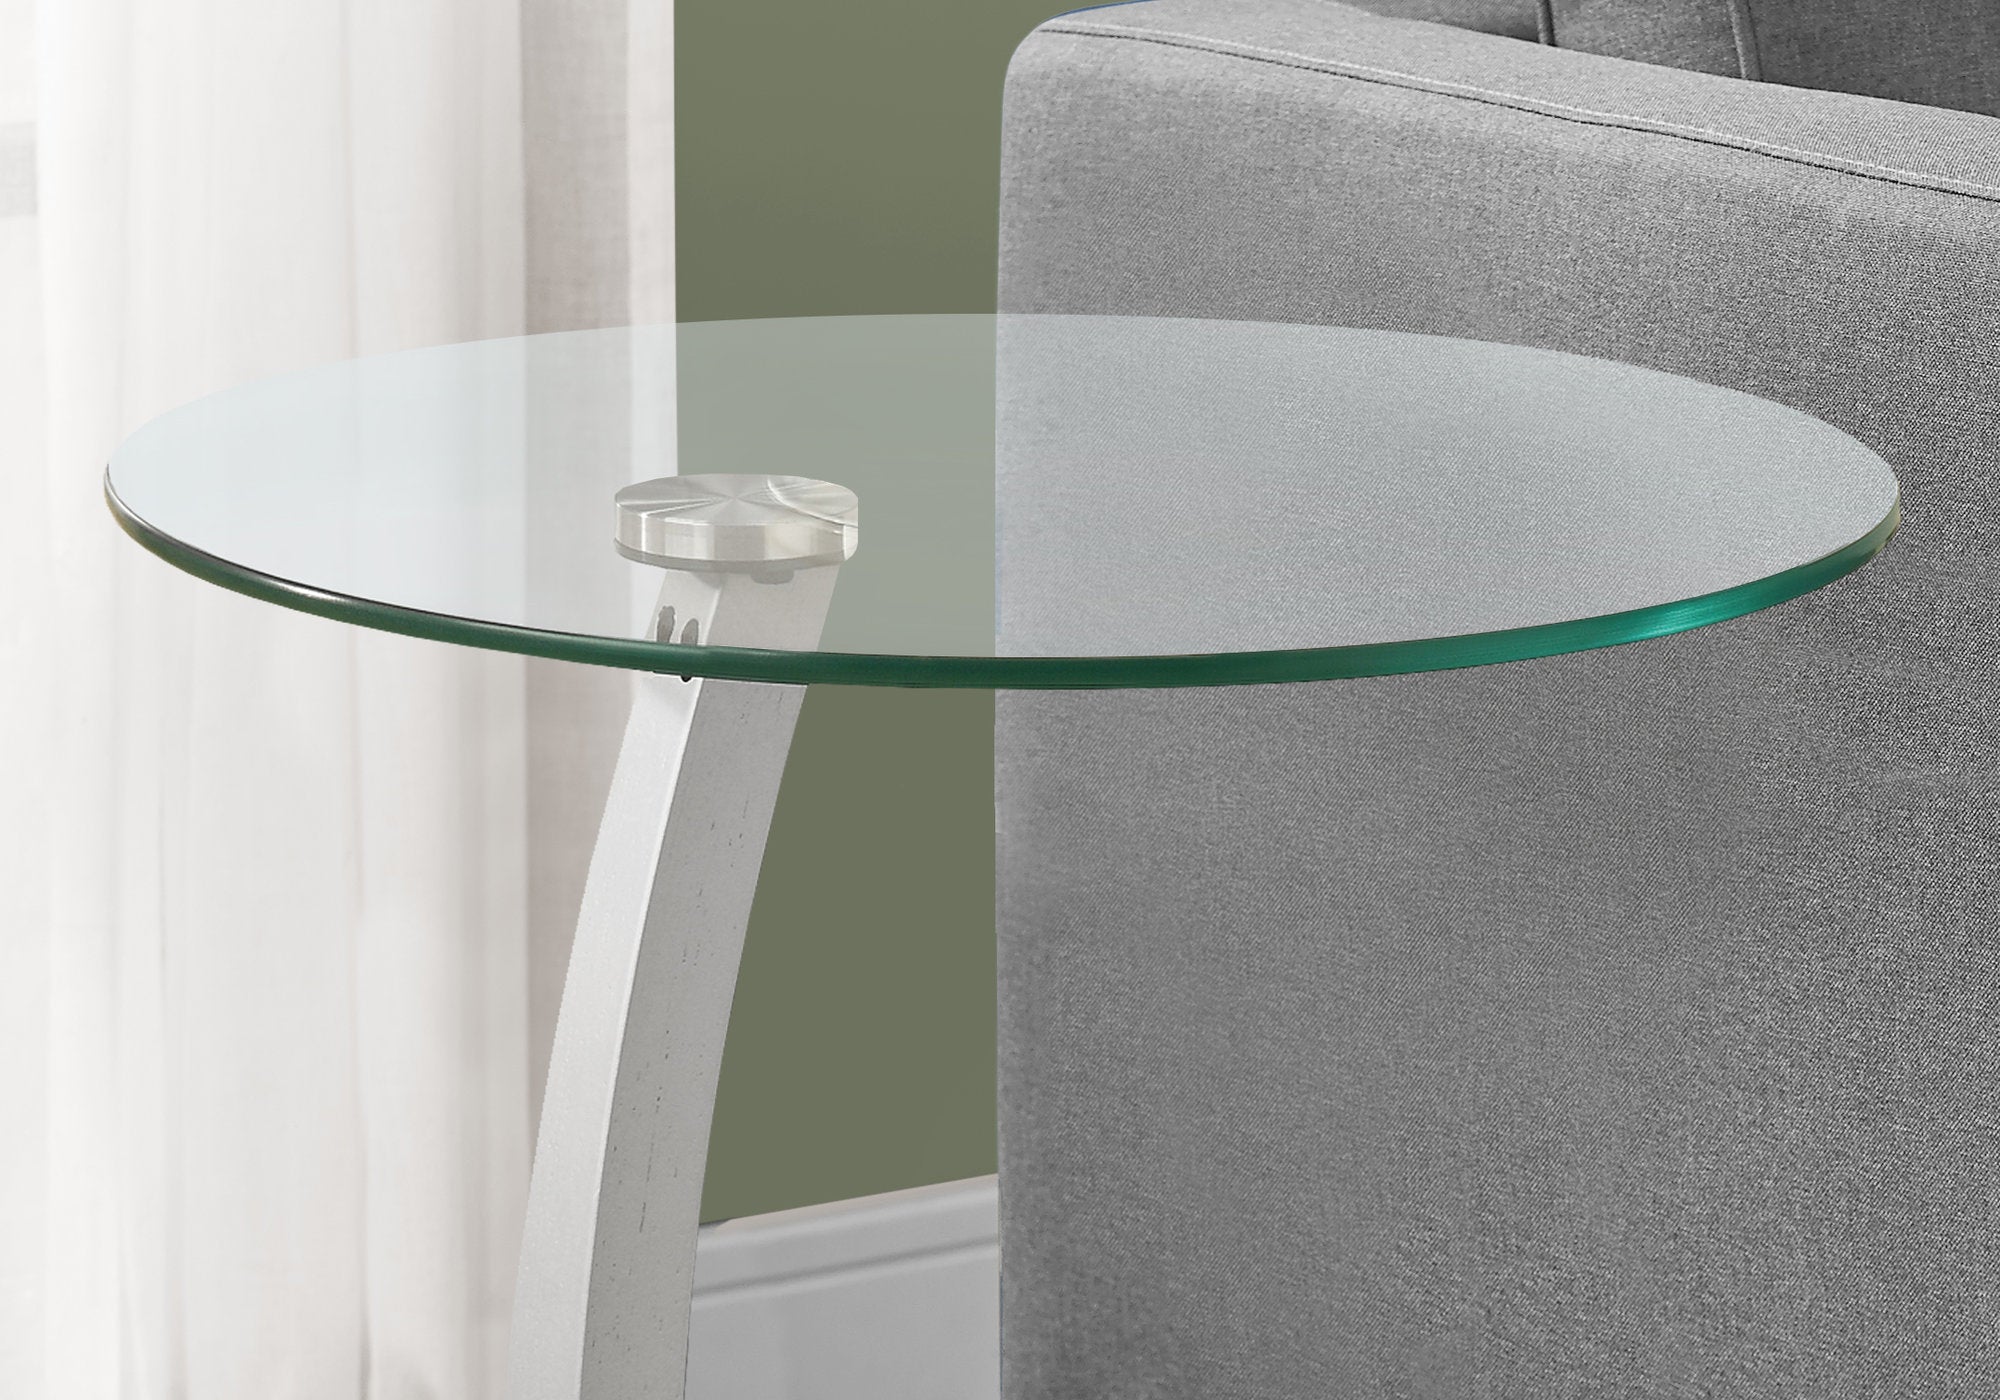 17.75" X 17.75" X 24" Whiteclear Particle Board Tempered Glass Accent Table